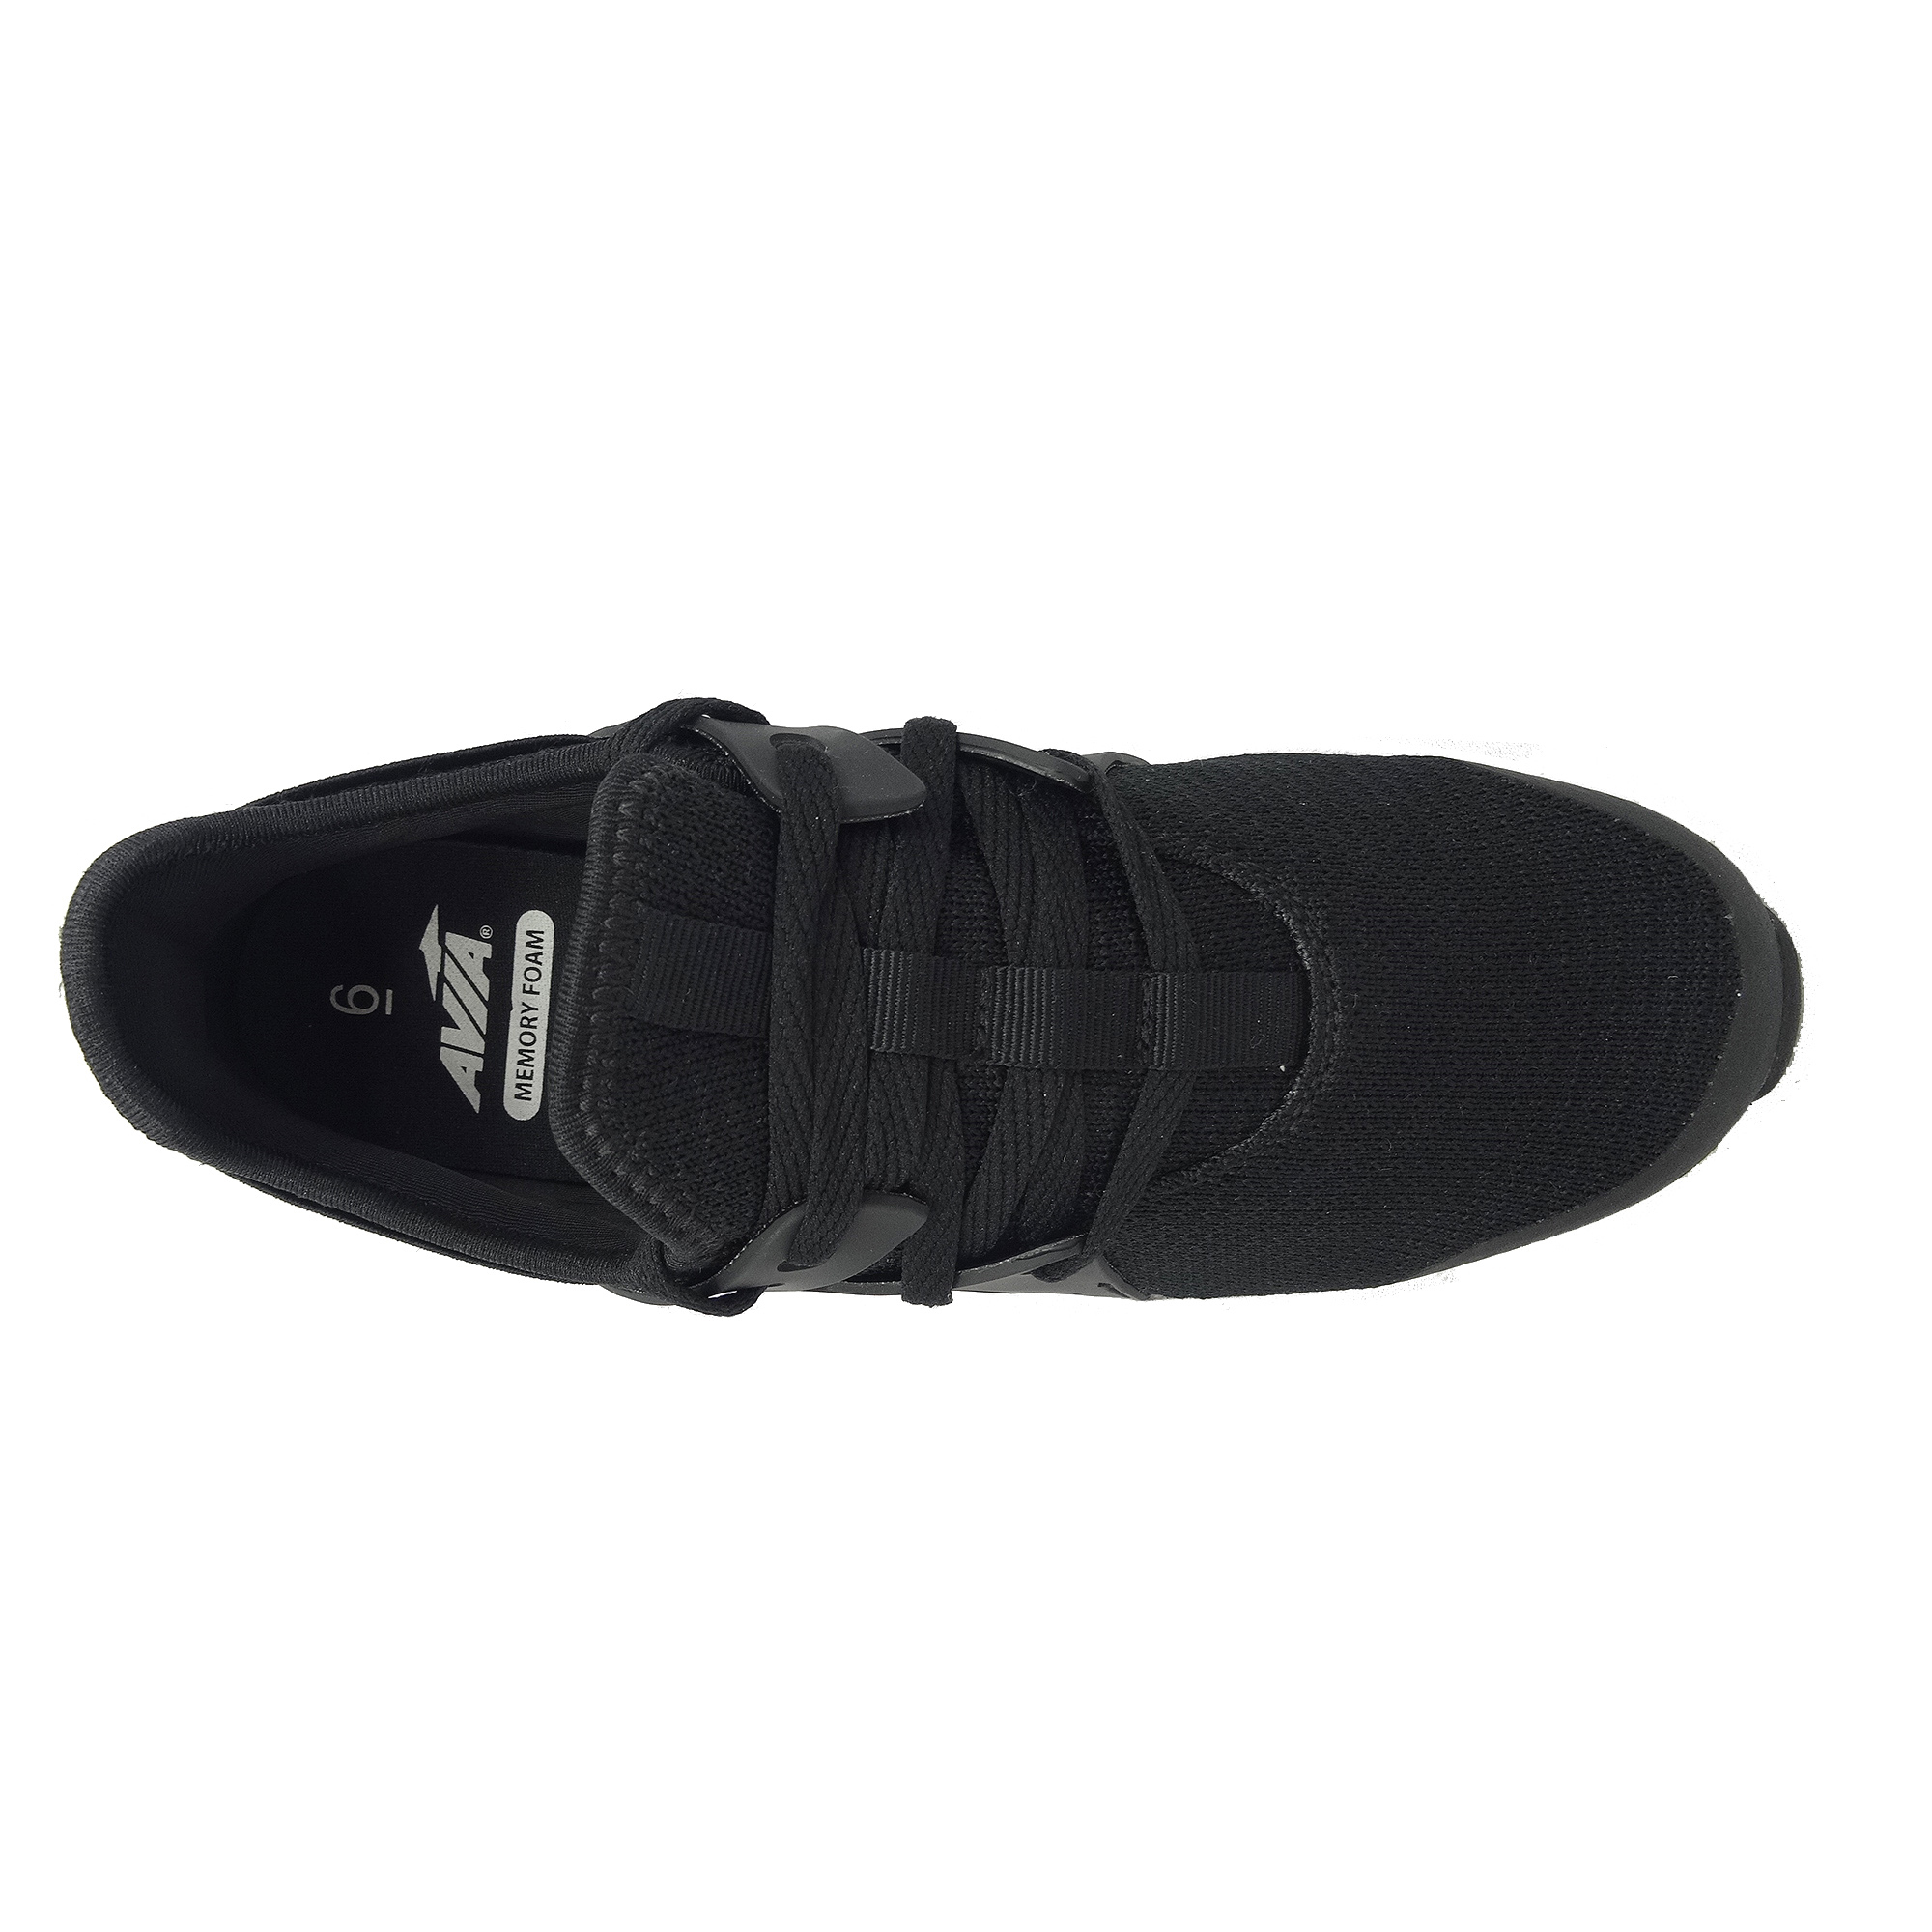 Women's Caged Mesh Athletic Shoe - image 4 of 5